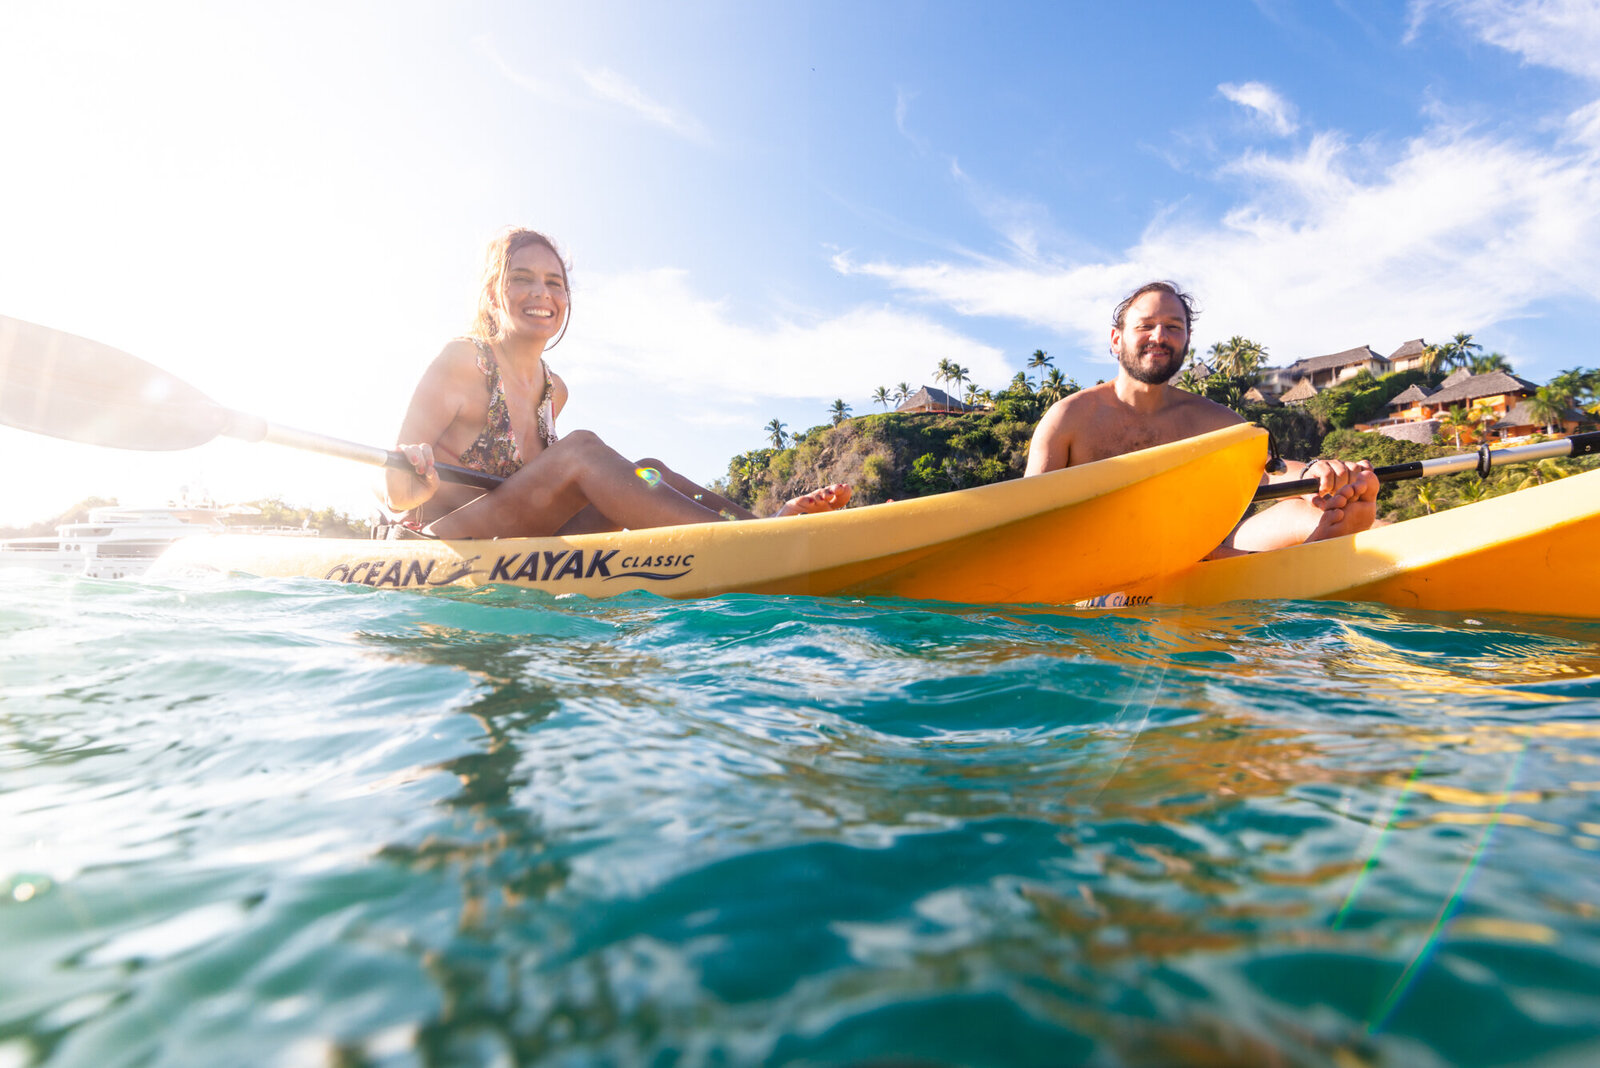 Photography-for-Adventure-Companies-Ecotourism-A-Kayaks-KarlaCifuentes-